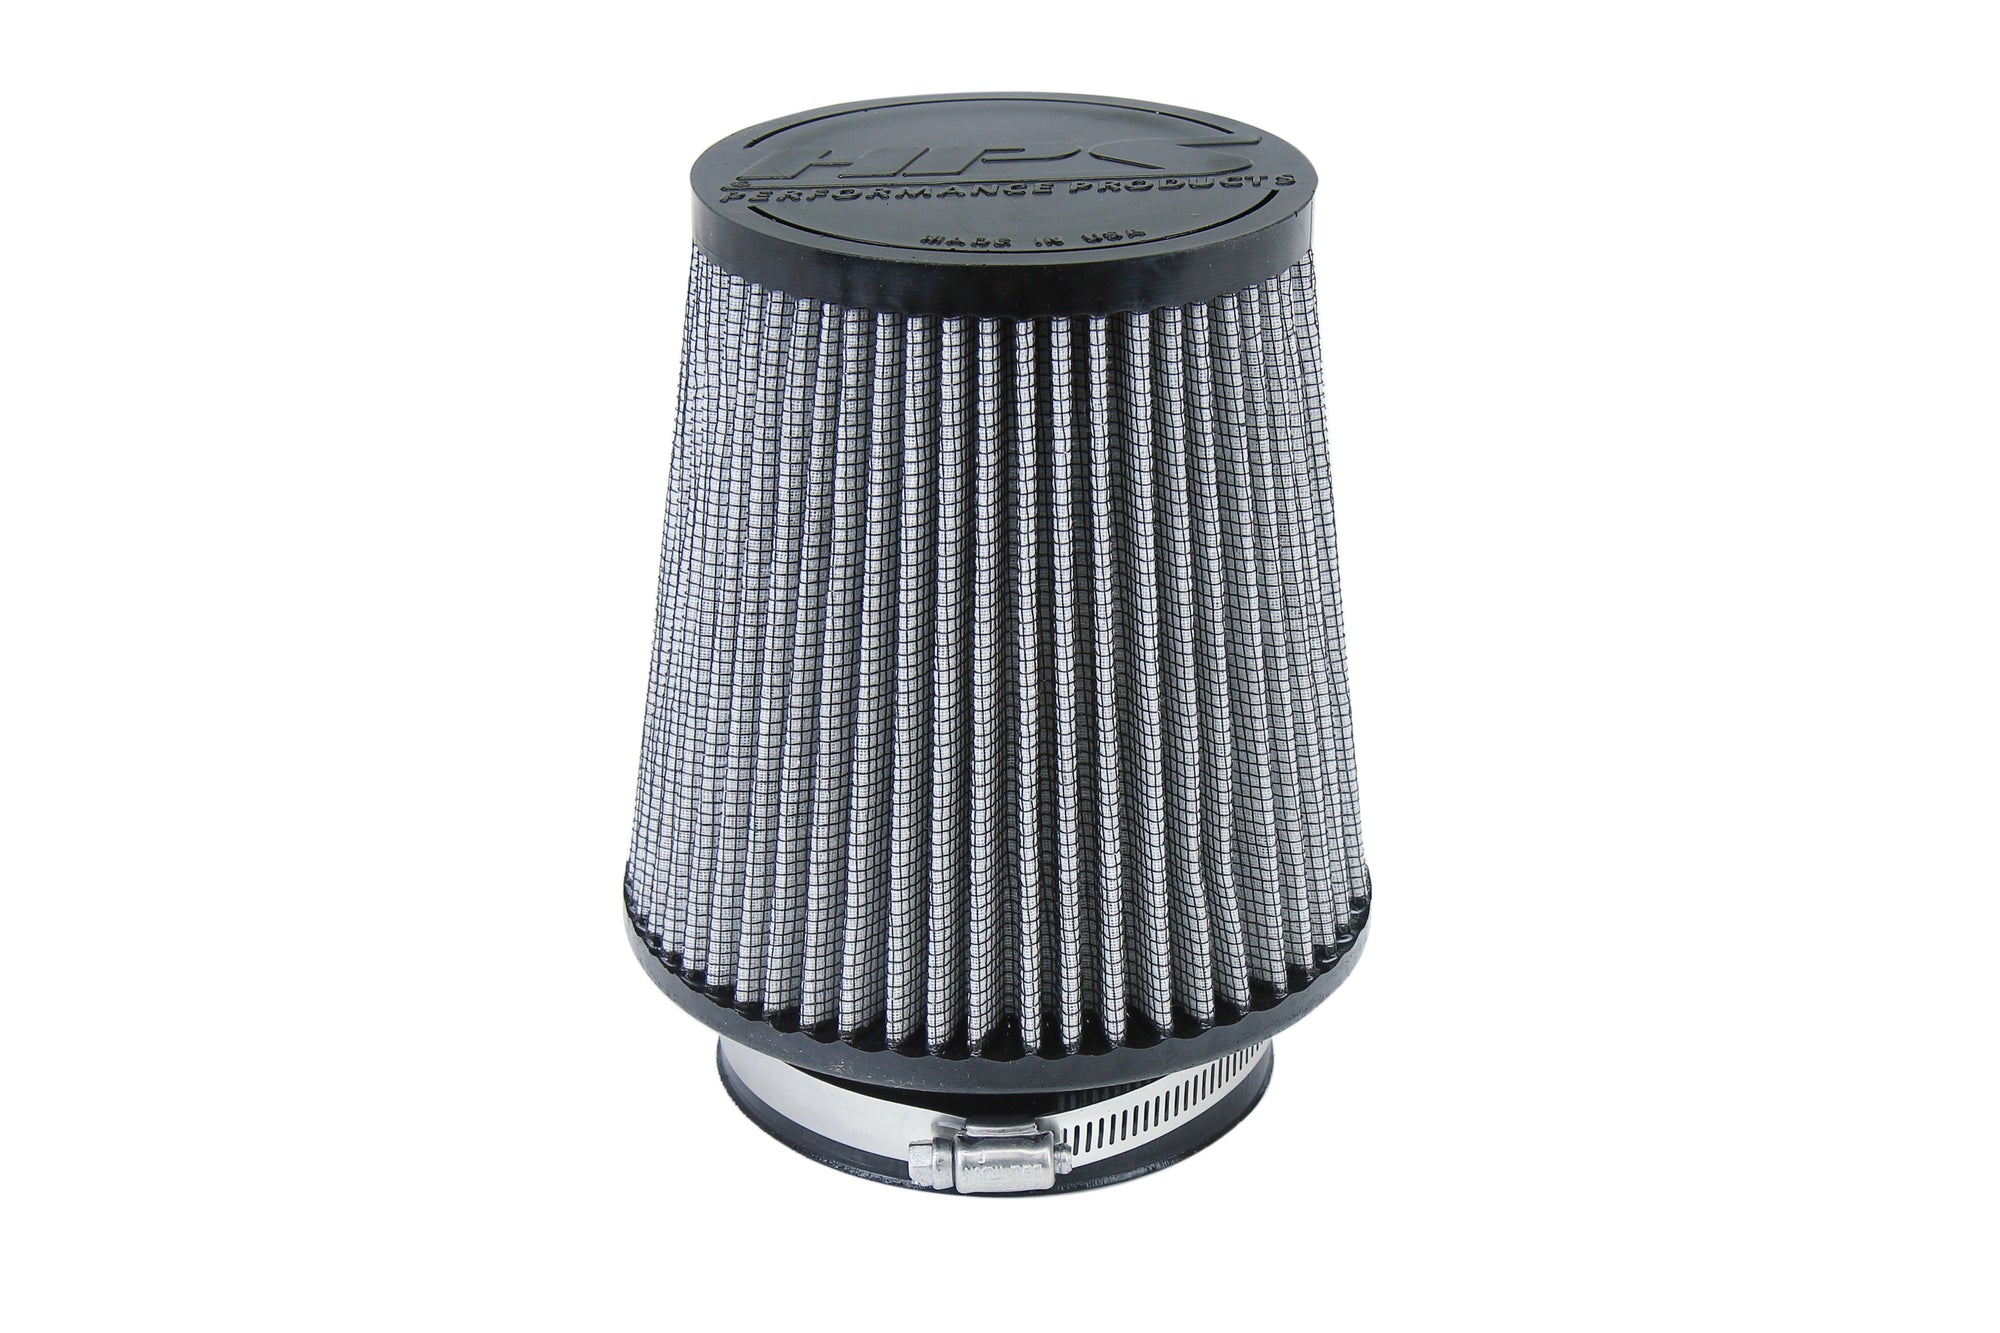 HPS Performance Air Filter 4 inch ID, 7.75 inch Length universal replacement intake kit shortram cold ram HPS-4300